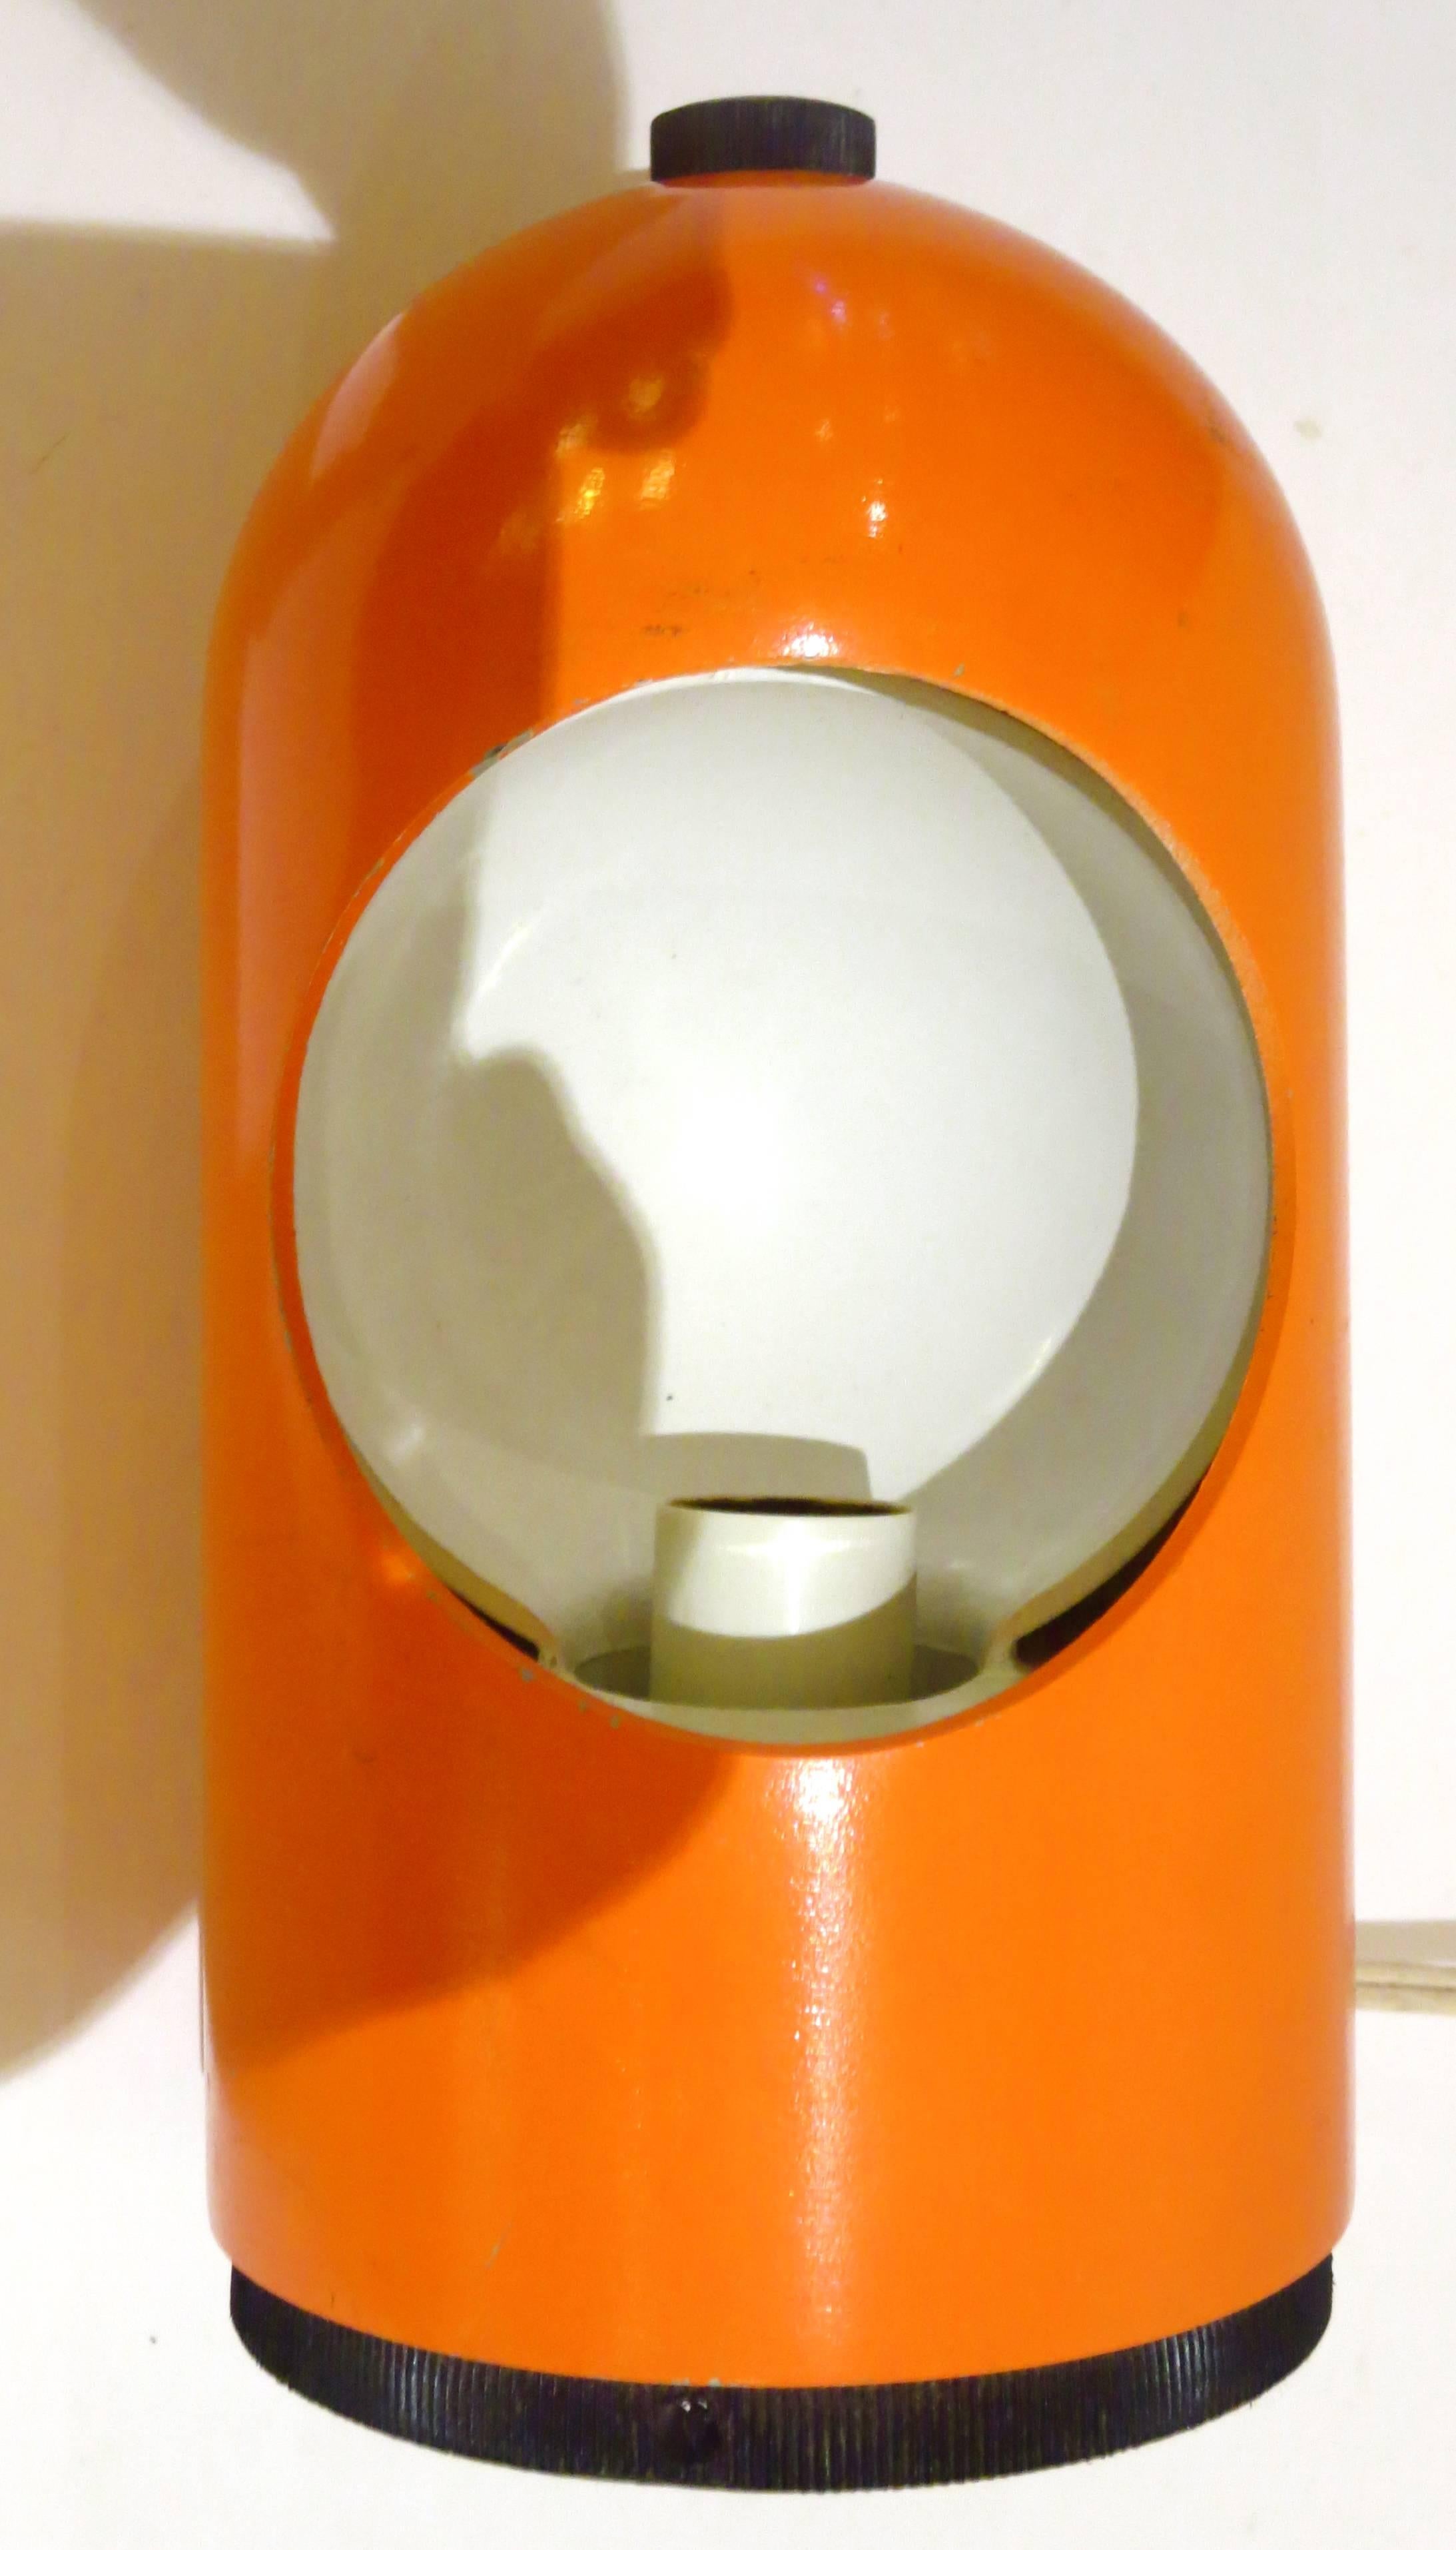 Orange eclipse lamp was manufactured in the United States by Lightolier during the 1960s. Designed by Joe Colombo an orange lacquered metal exterior with a white inside and a rotating screen in the center and plastic base with original label.